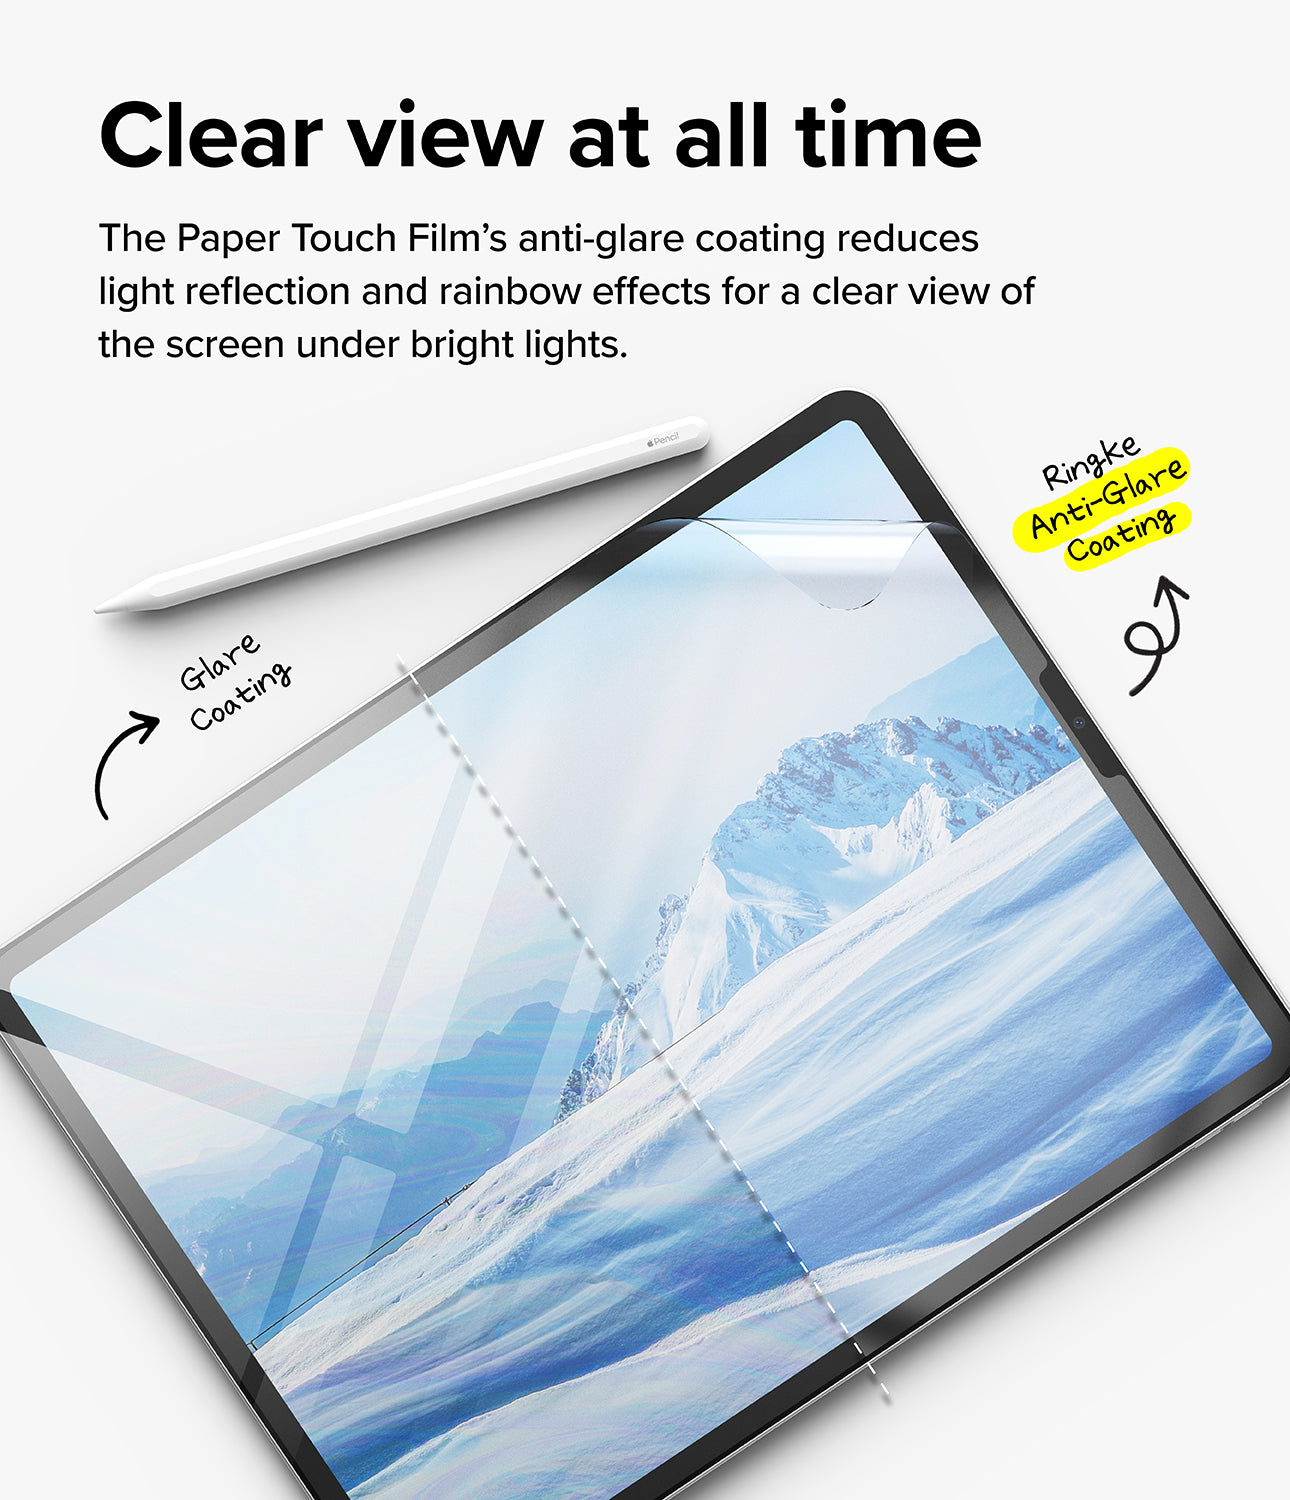 iPad Pro 11" (M4) Screen Protector | Paper Touch Film - Soft - Clear view at all time. The Paper Touch Film's anti-glare coating reduces light reflection and rainbow effects for a clear view of the screen under bright lights.